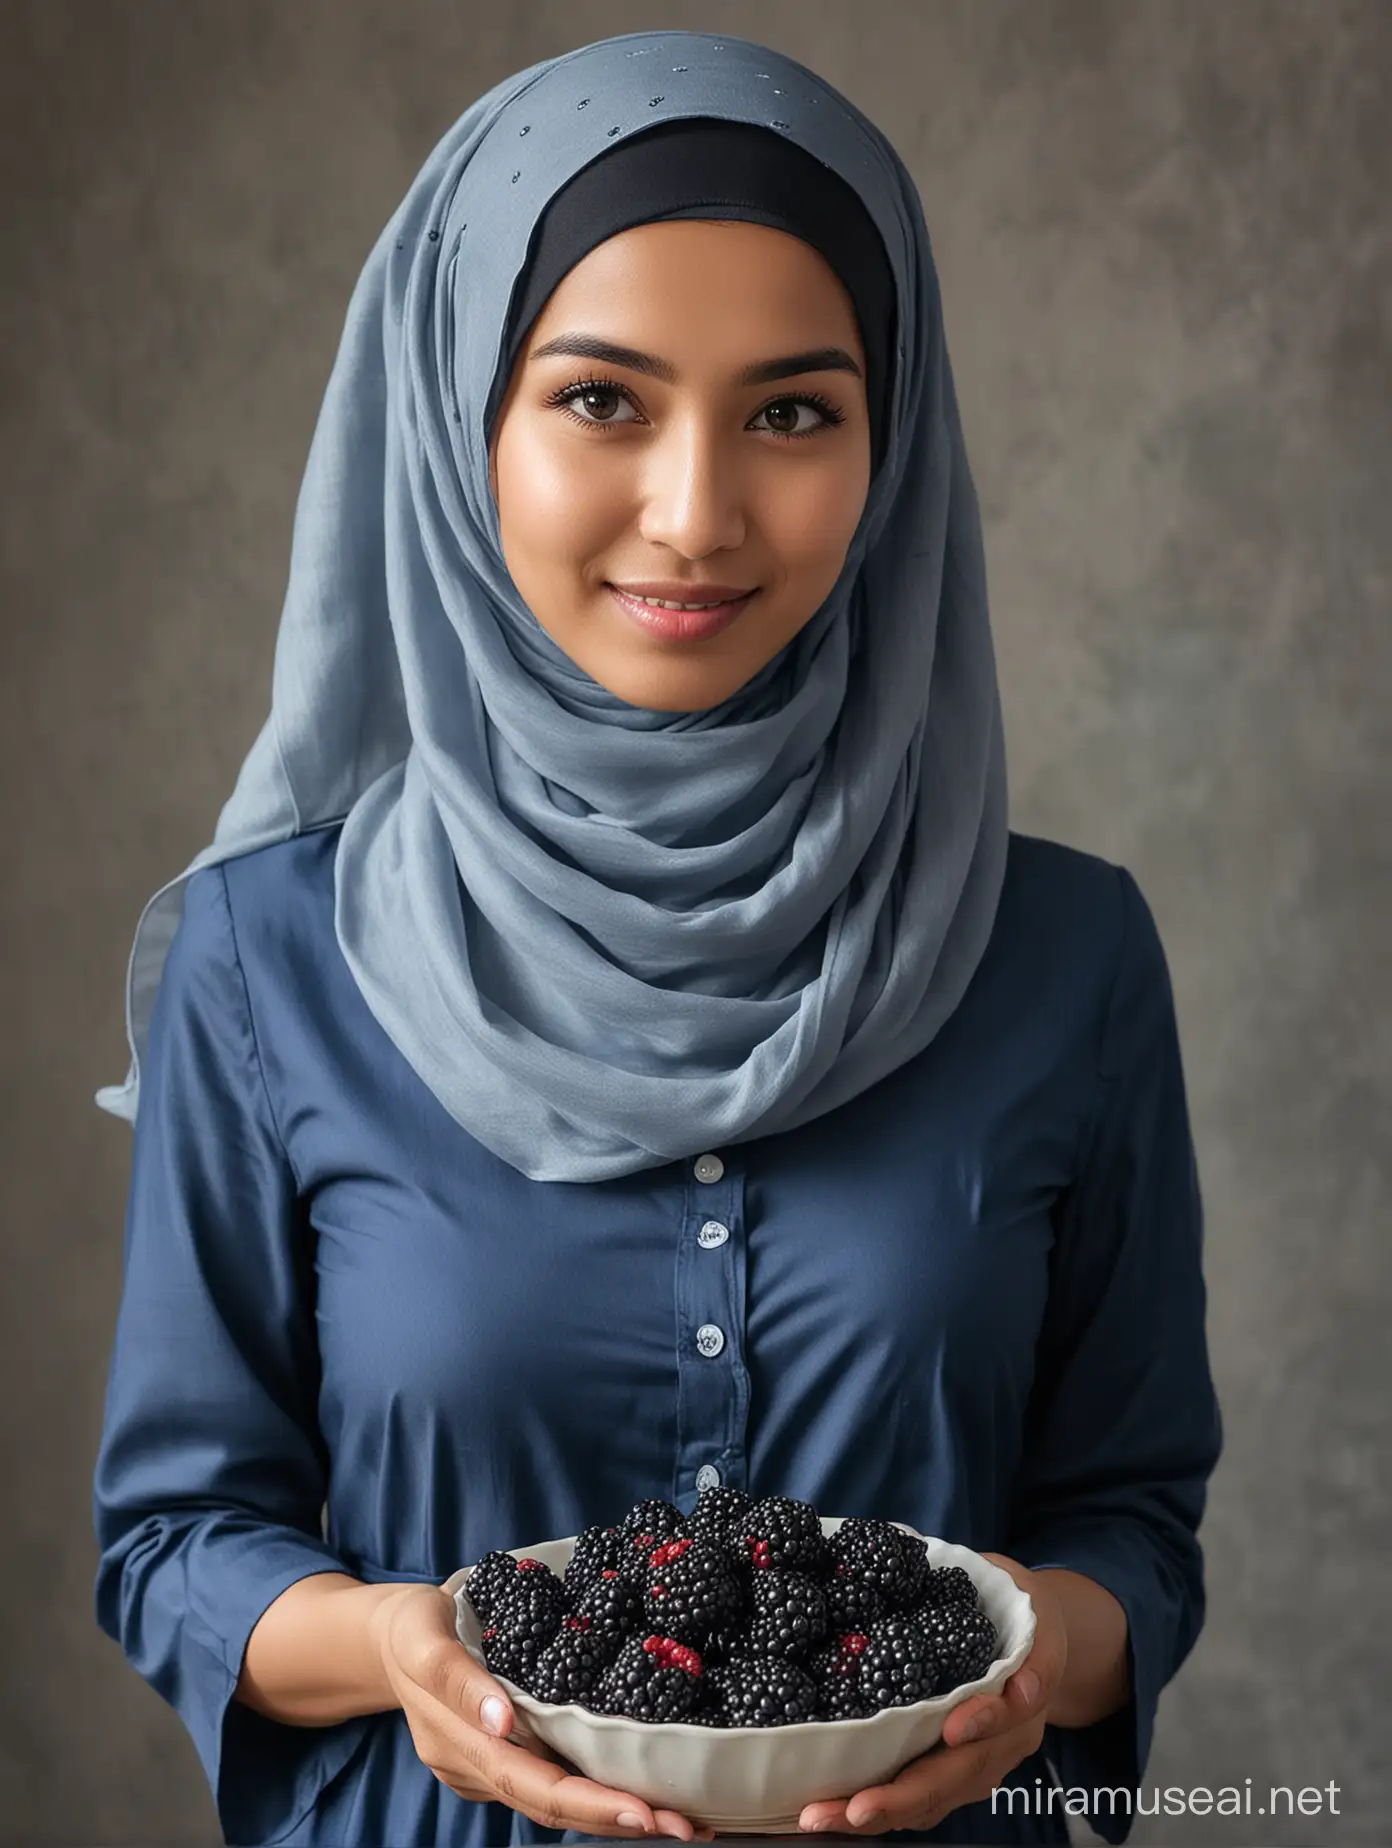 A Indonesia woman in a blue dress and hijab is holding a bowl of blackberries.